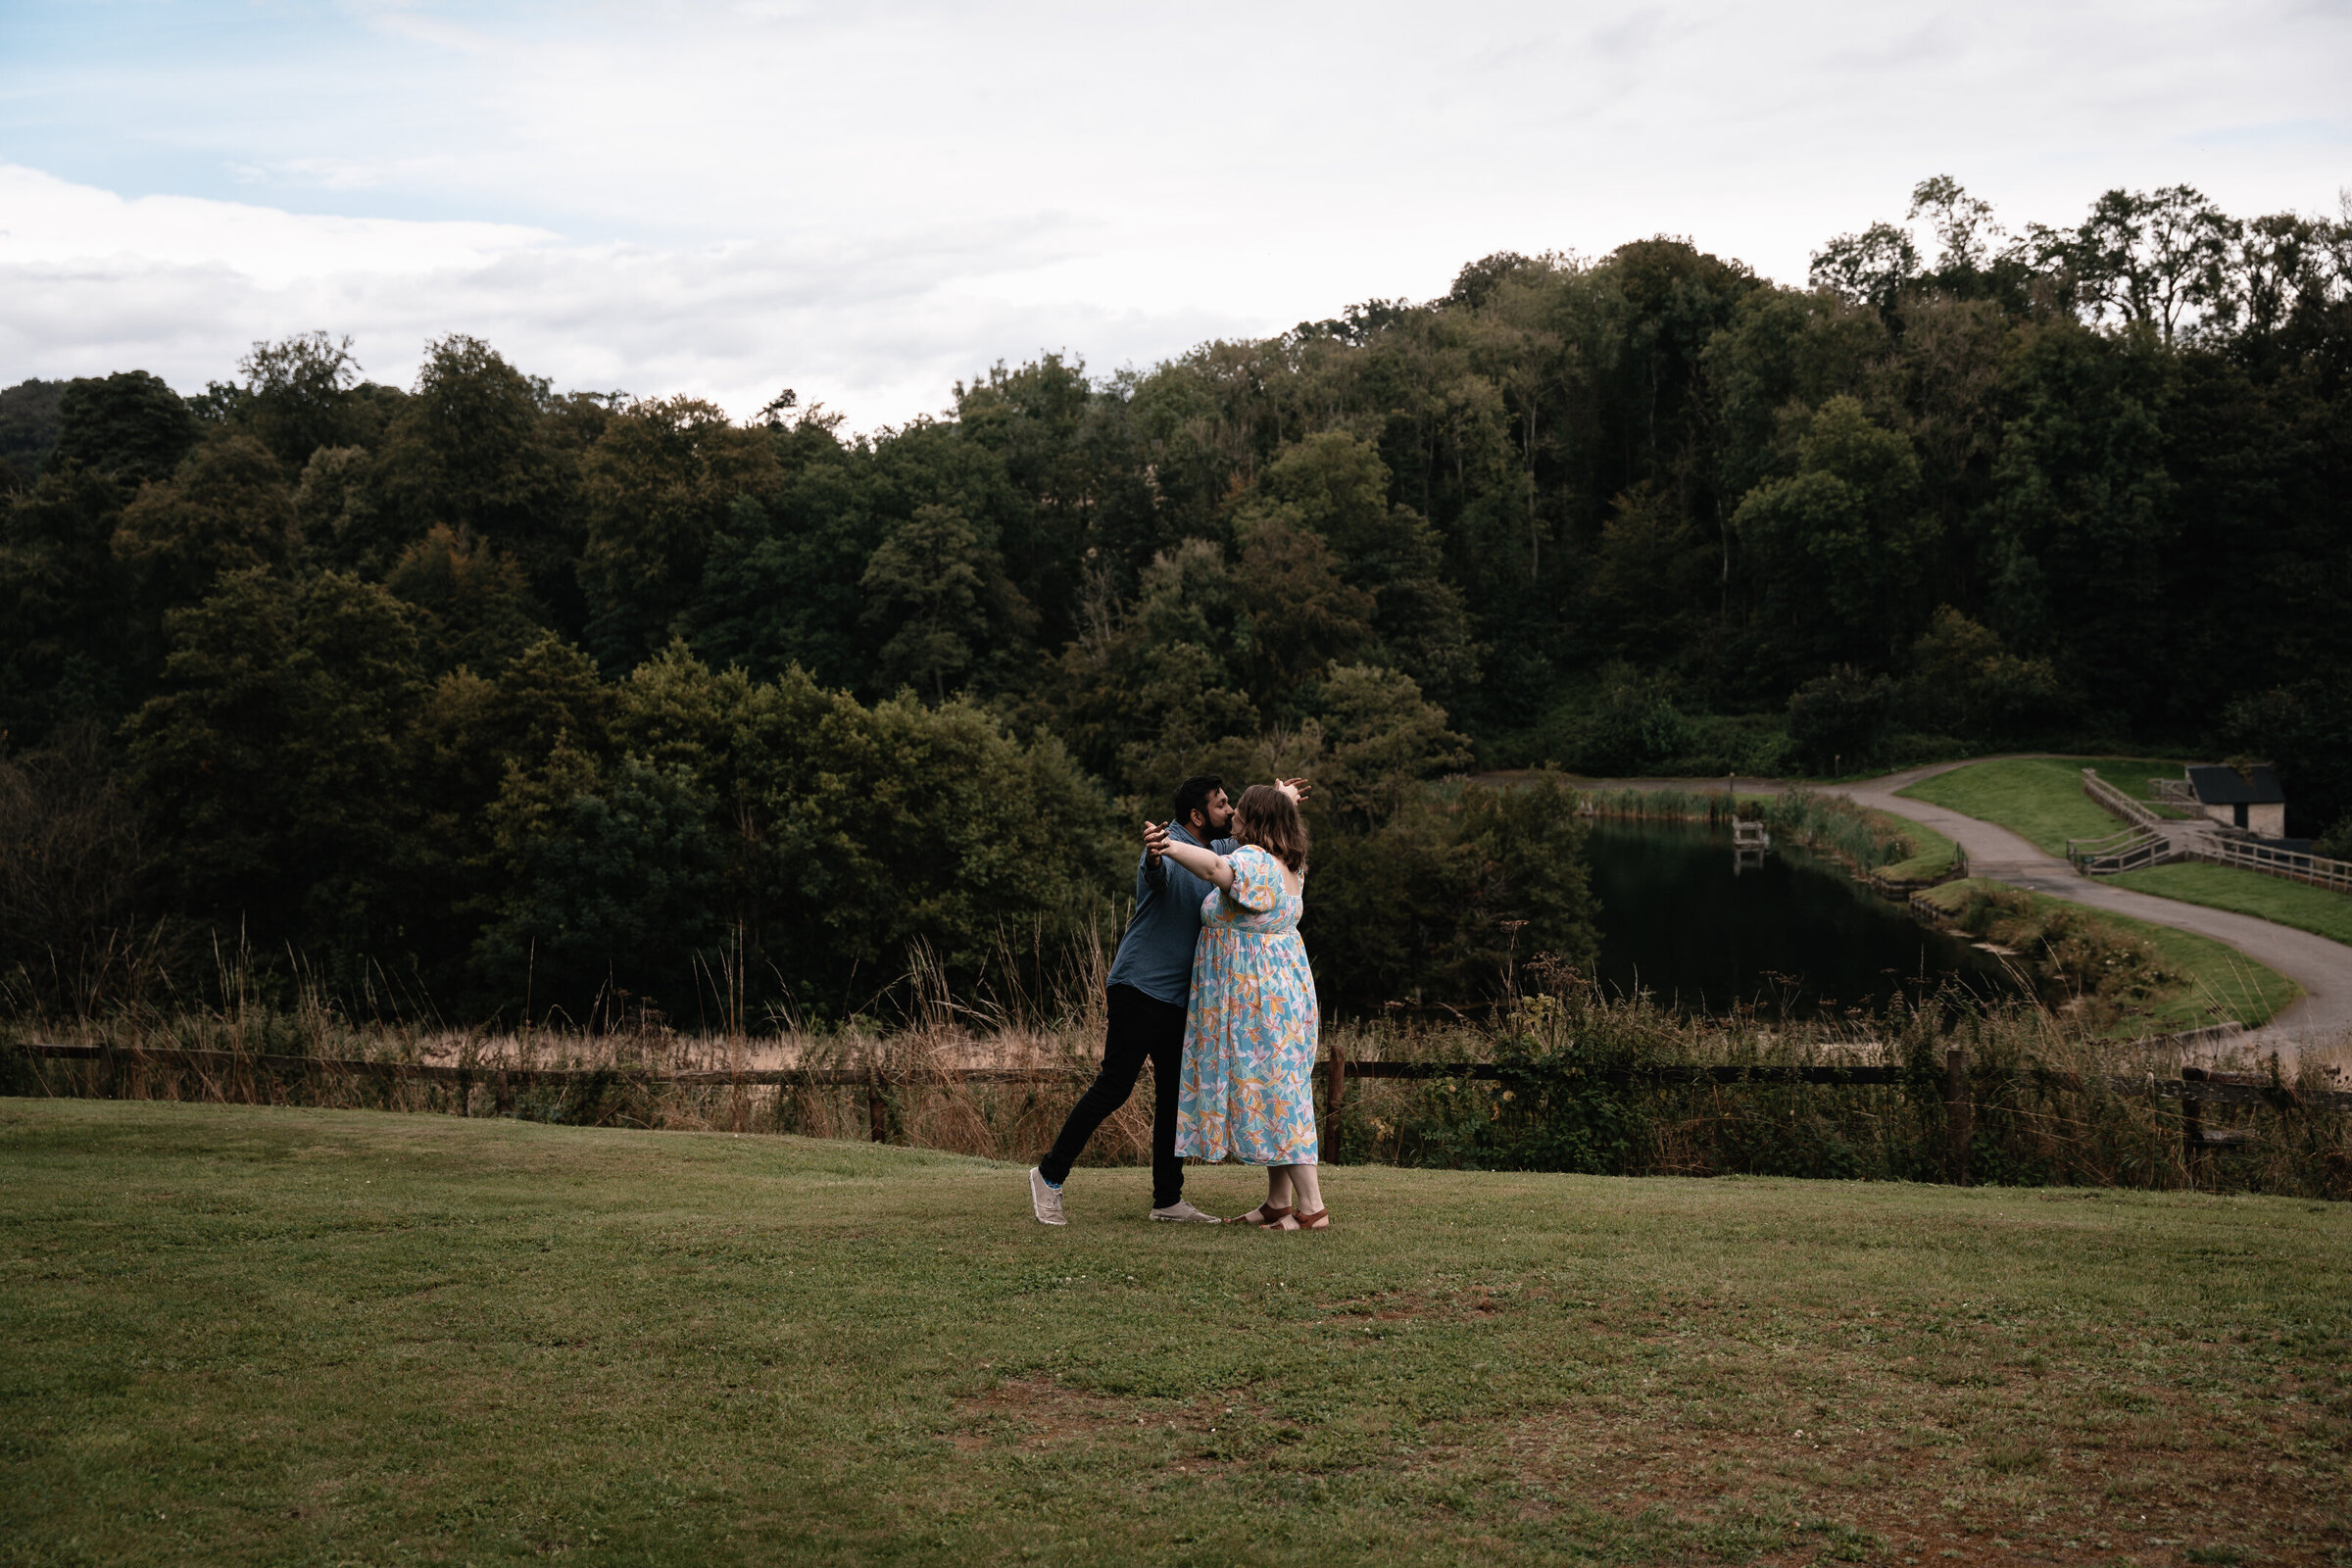 Couple dancing together on the grass with forest in background